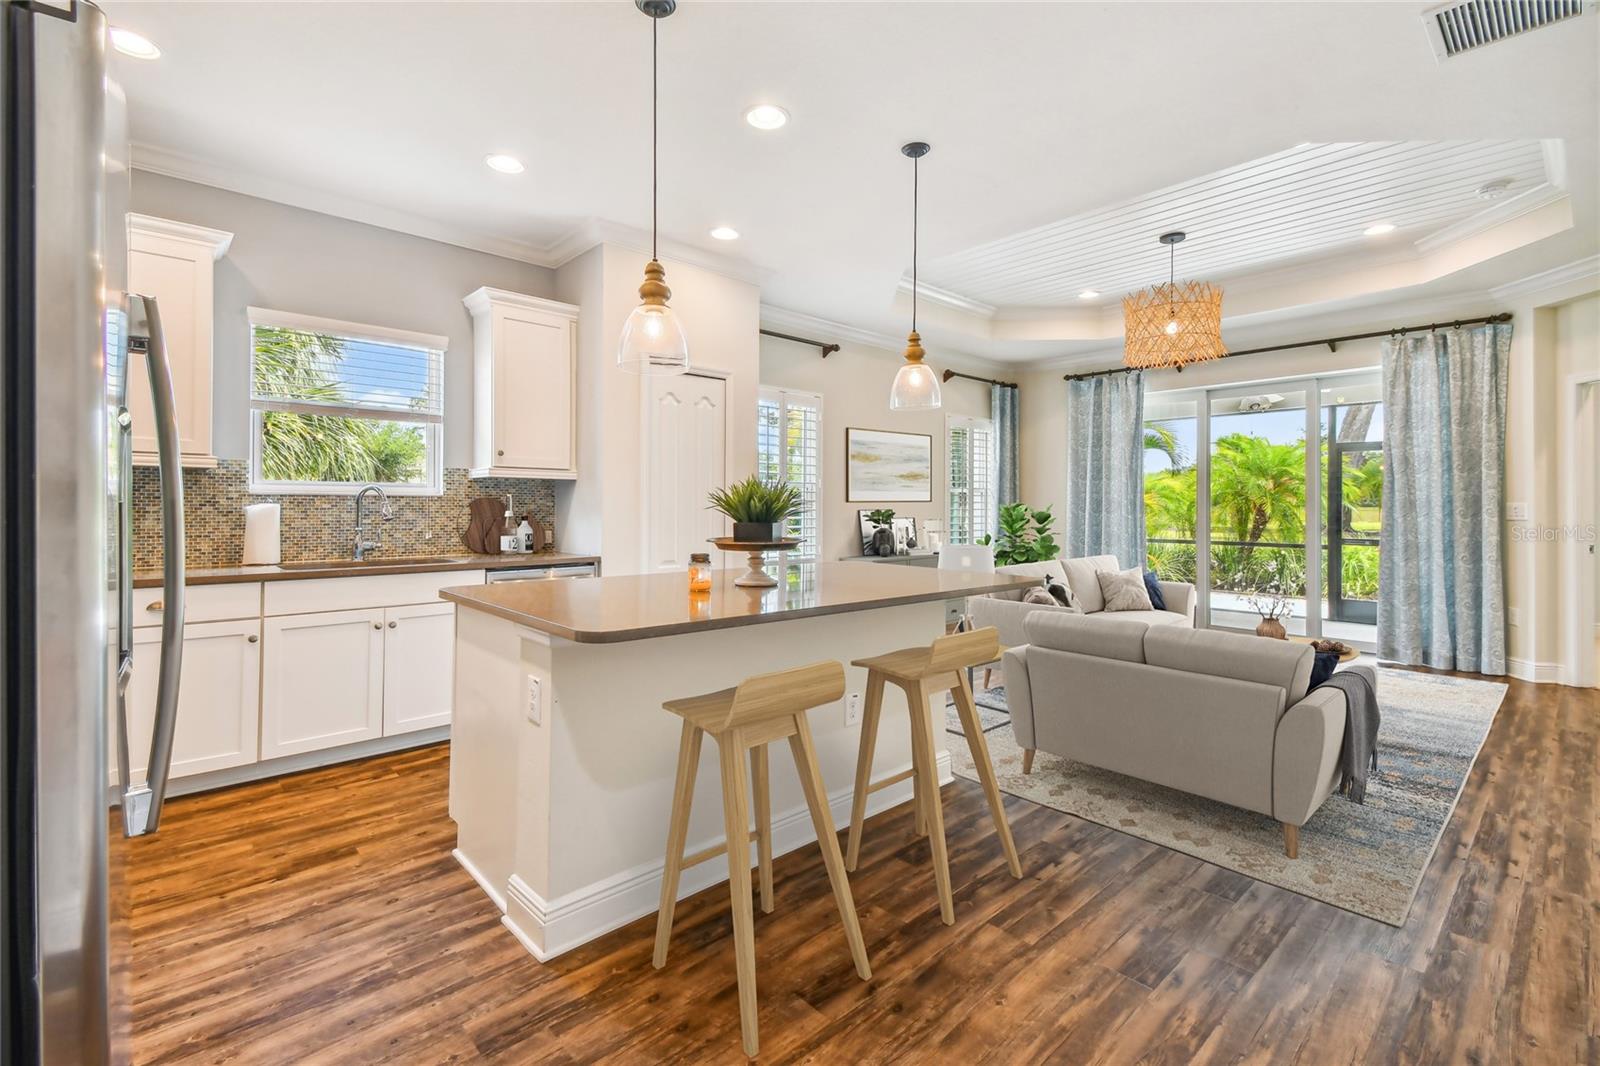 This open plan assures you will never be left along in the kitchen while entertaining. Join in the fun!